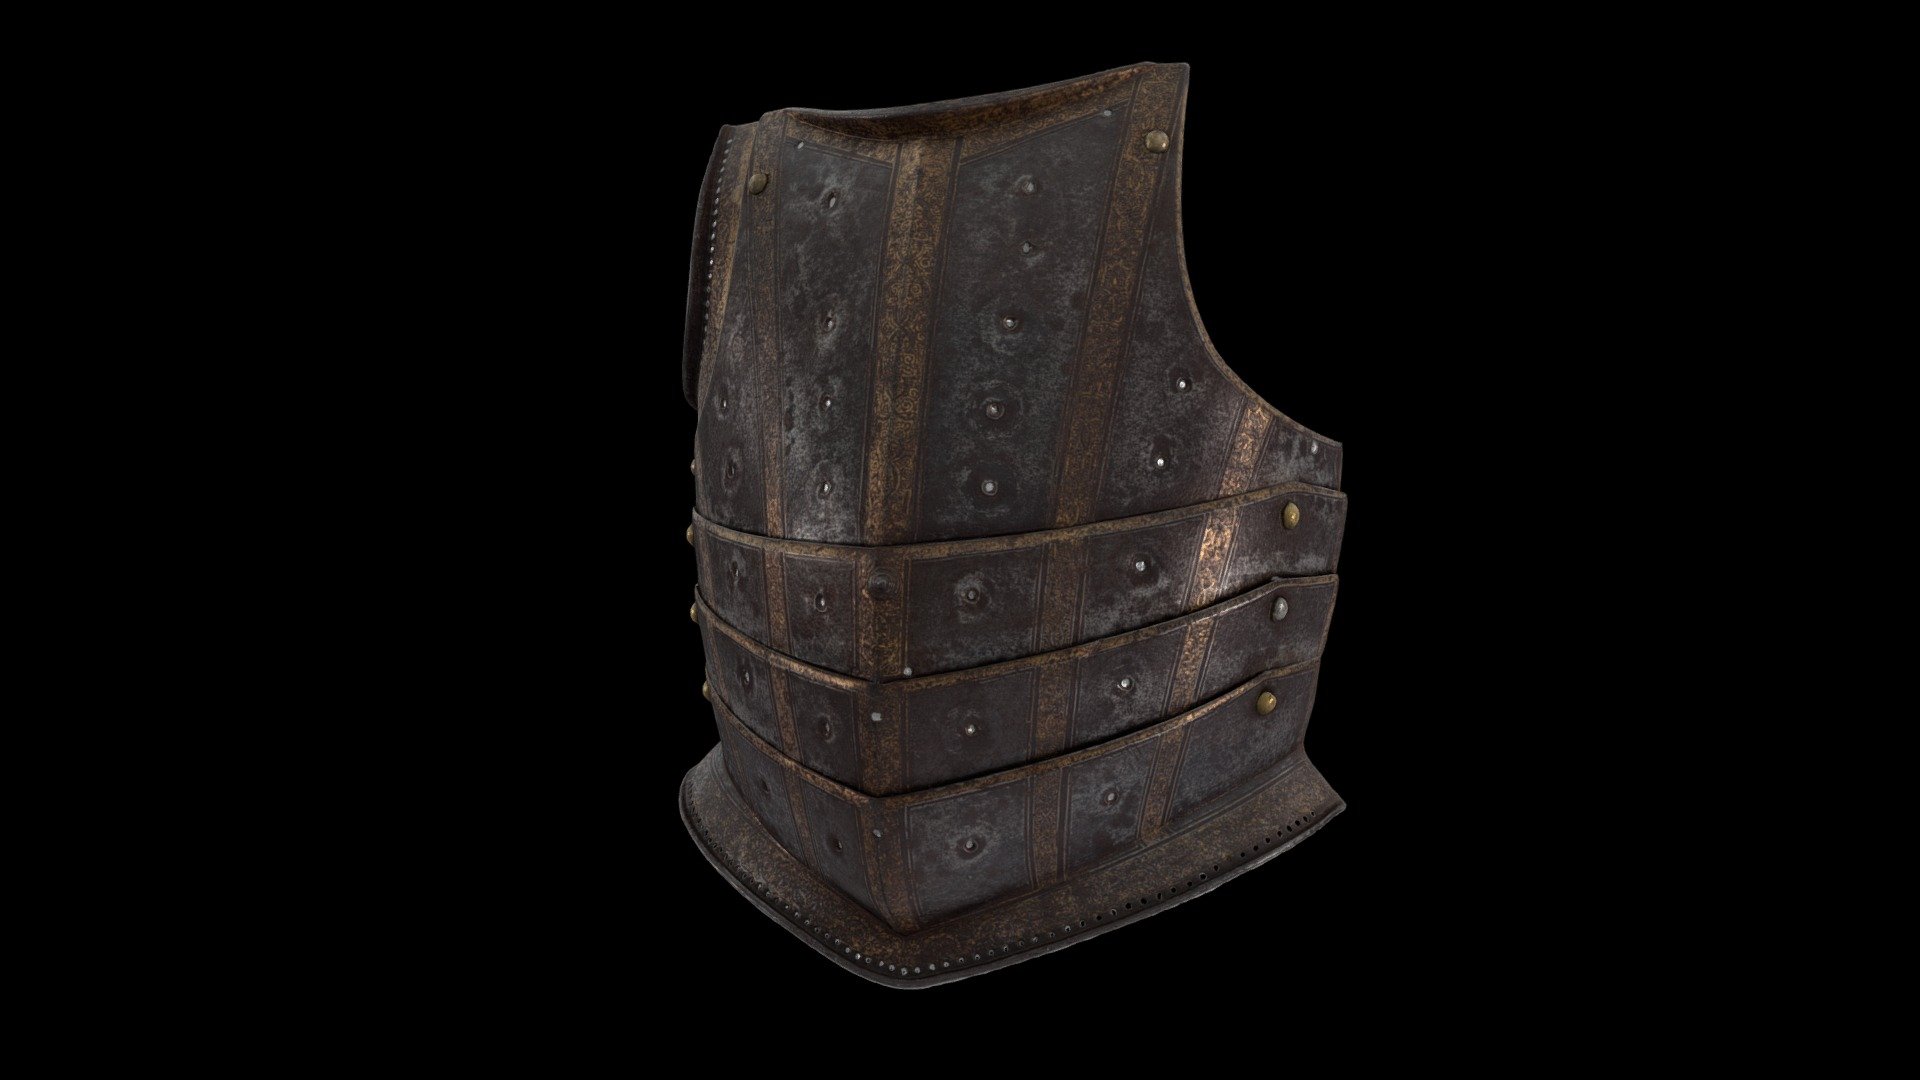 1916.1521 Breastplate From Hussar's Cuirass